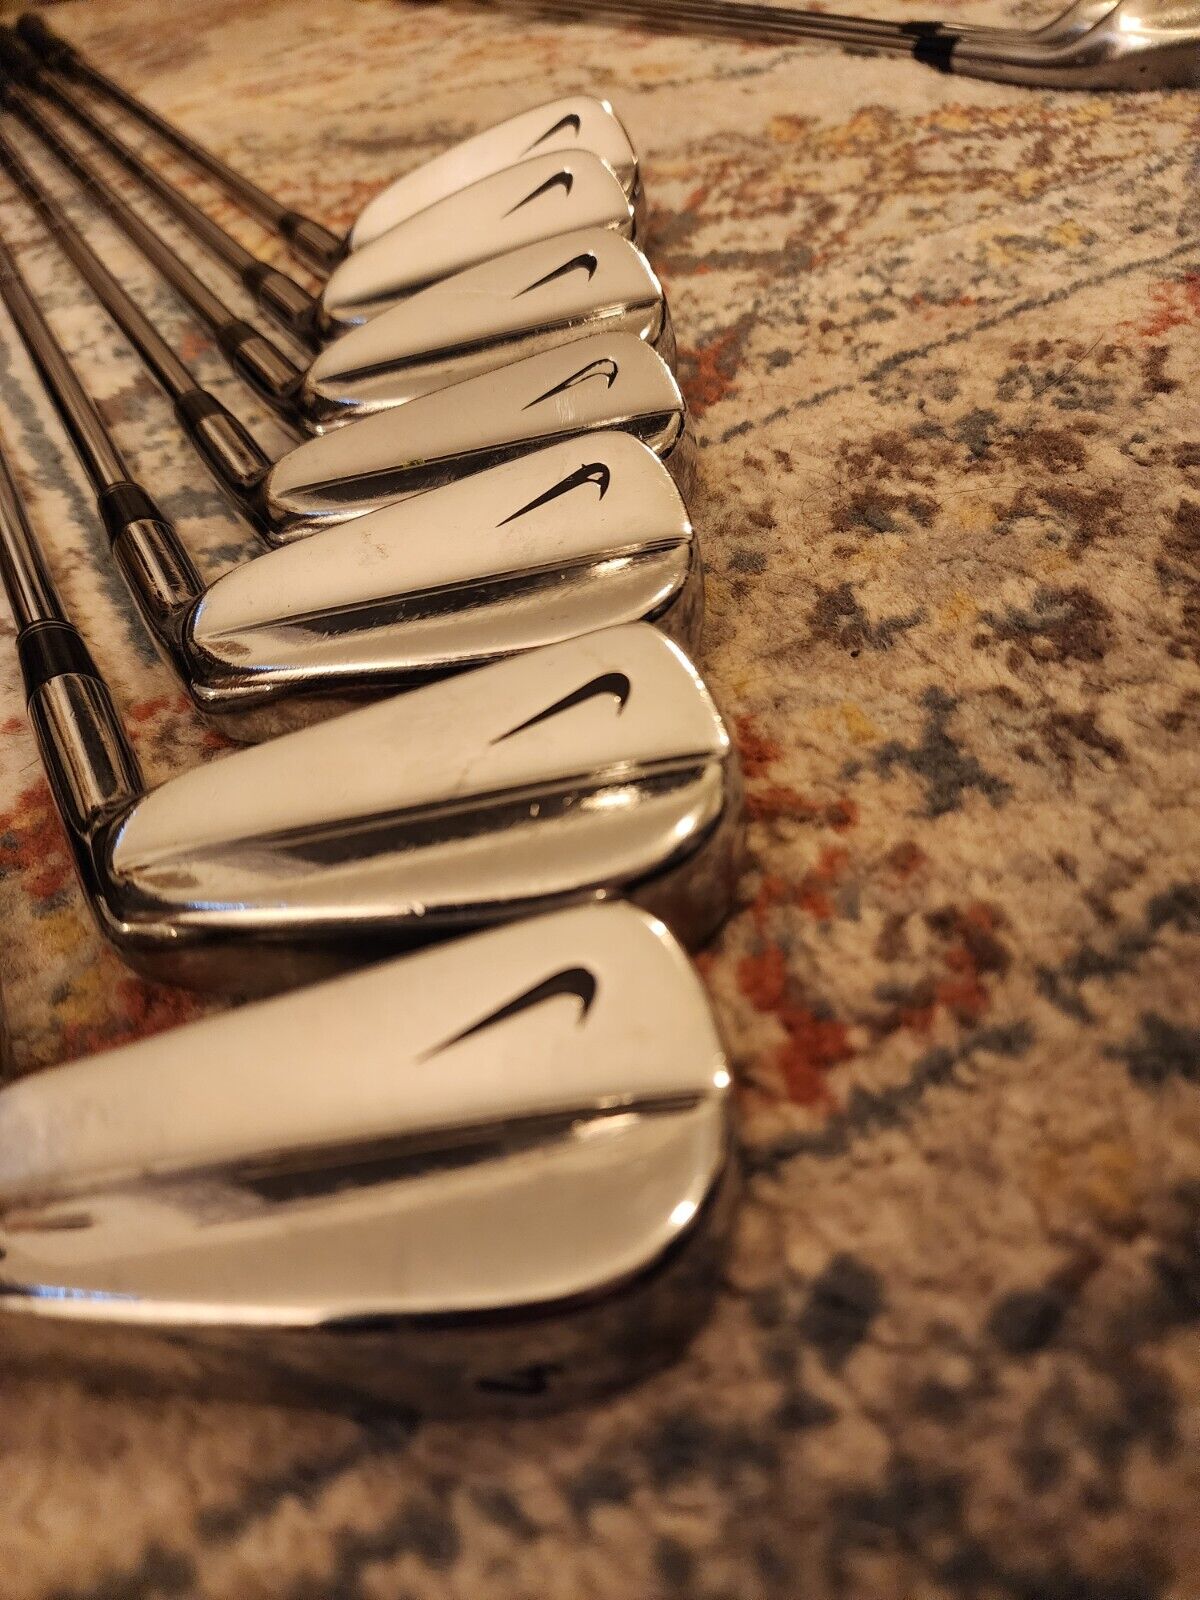 NIKE Muscle Back Forged 7pc IRONS SET GOLF CLUBS - Great Condition, 4-PW+53+56